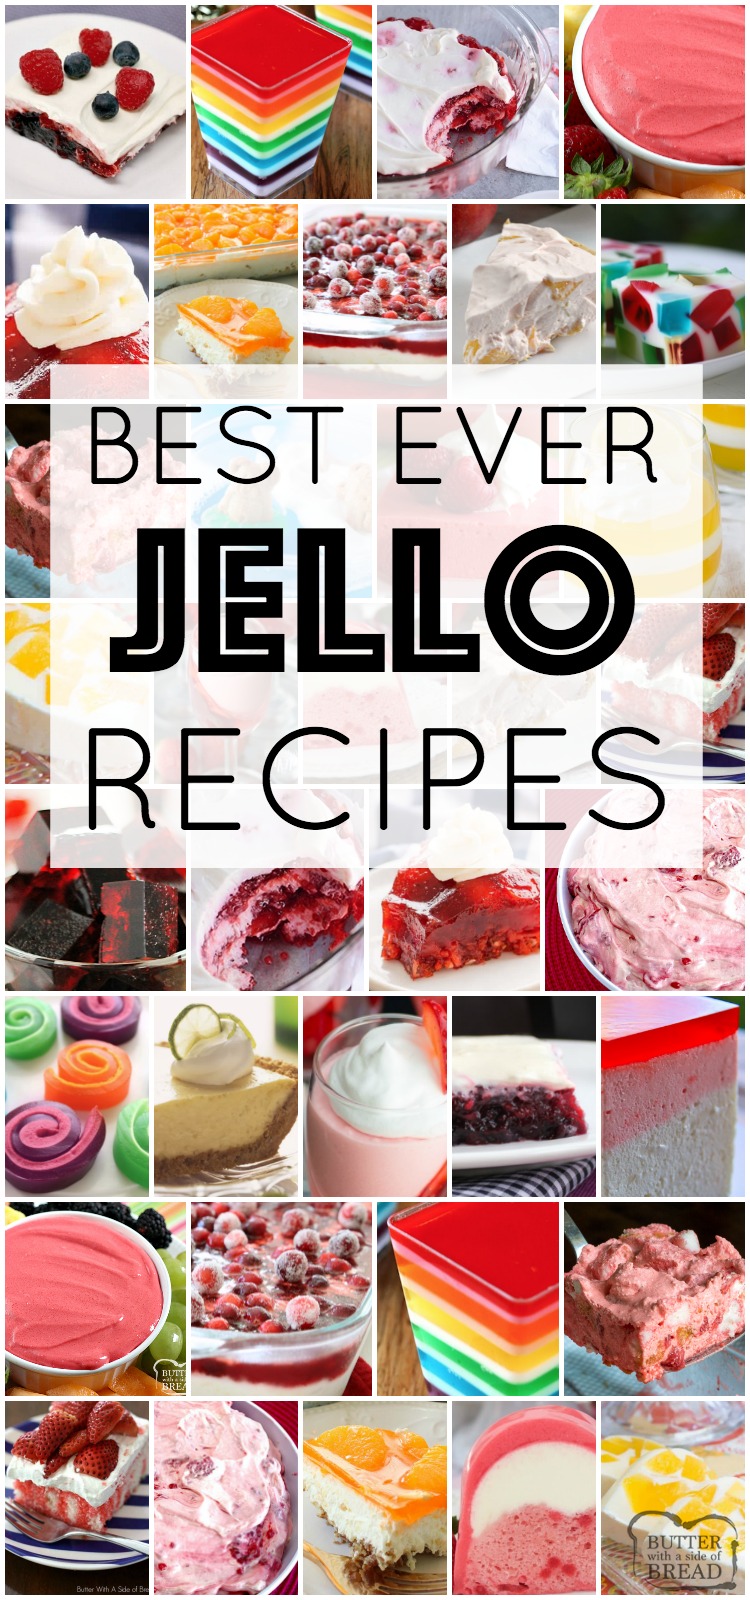 The best Jello recipes ever, all gathered in one place! Jello recipes for holidays, parties, dessert and more. We cover jello salad recipes, jello cakes and cookies and layered jello desserts. Fun, tasty & simple jello recipes for any occasion. #jello #jellosalad #dessert #jellorecipes #recipe #salad #fruit from BUTTER WITH A SIDE OF BREAD